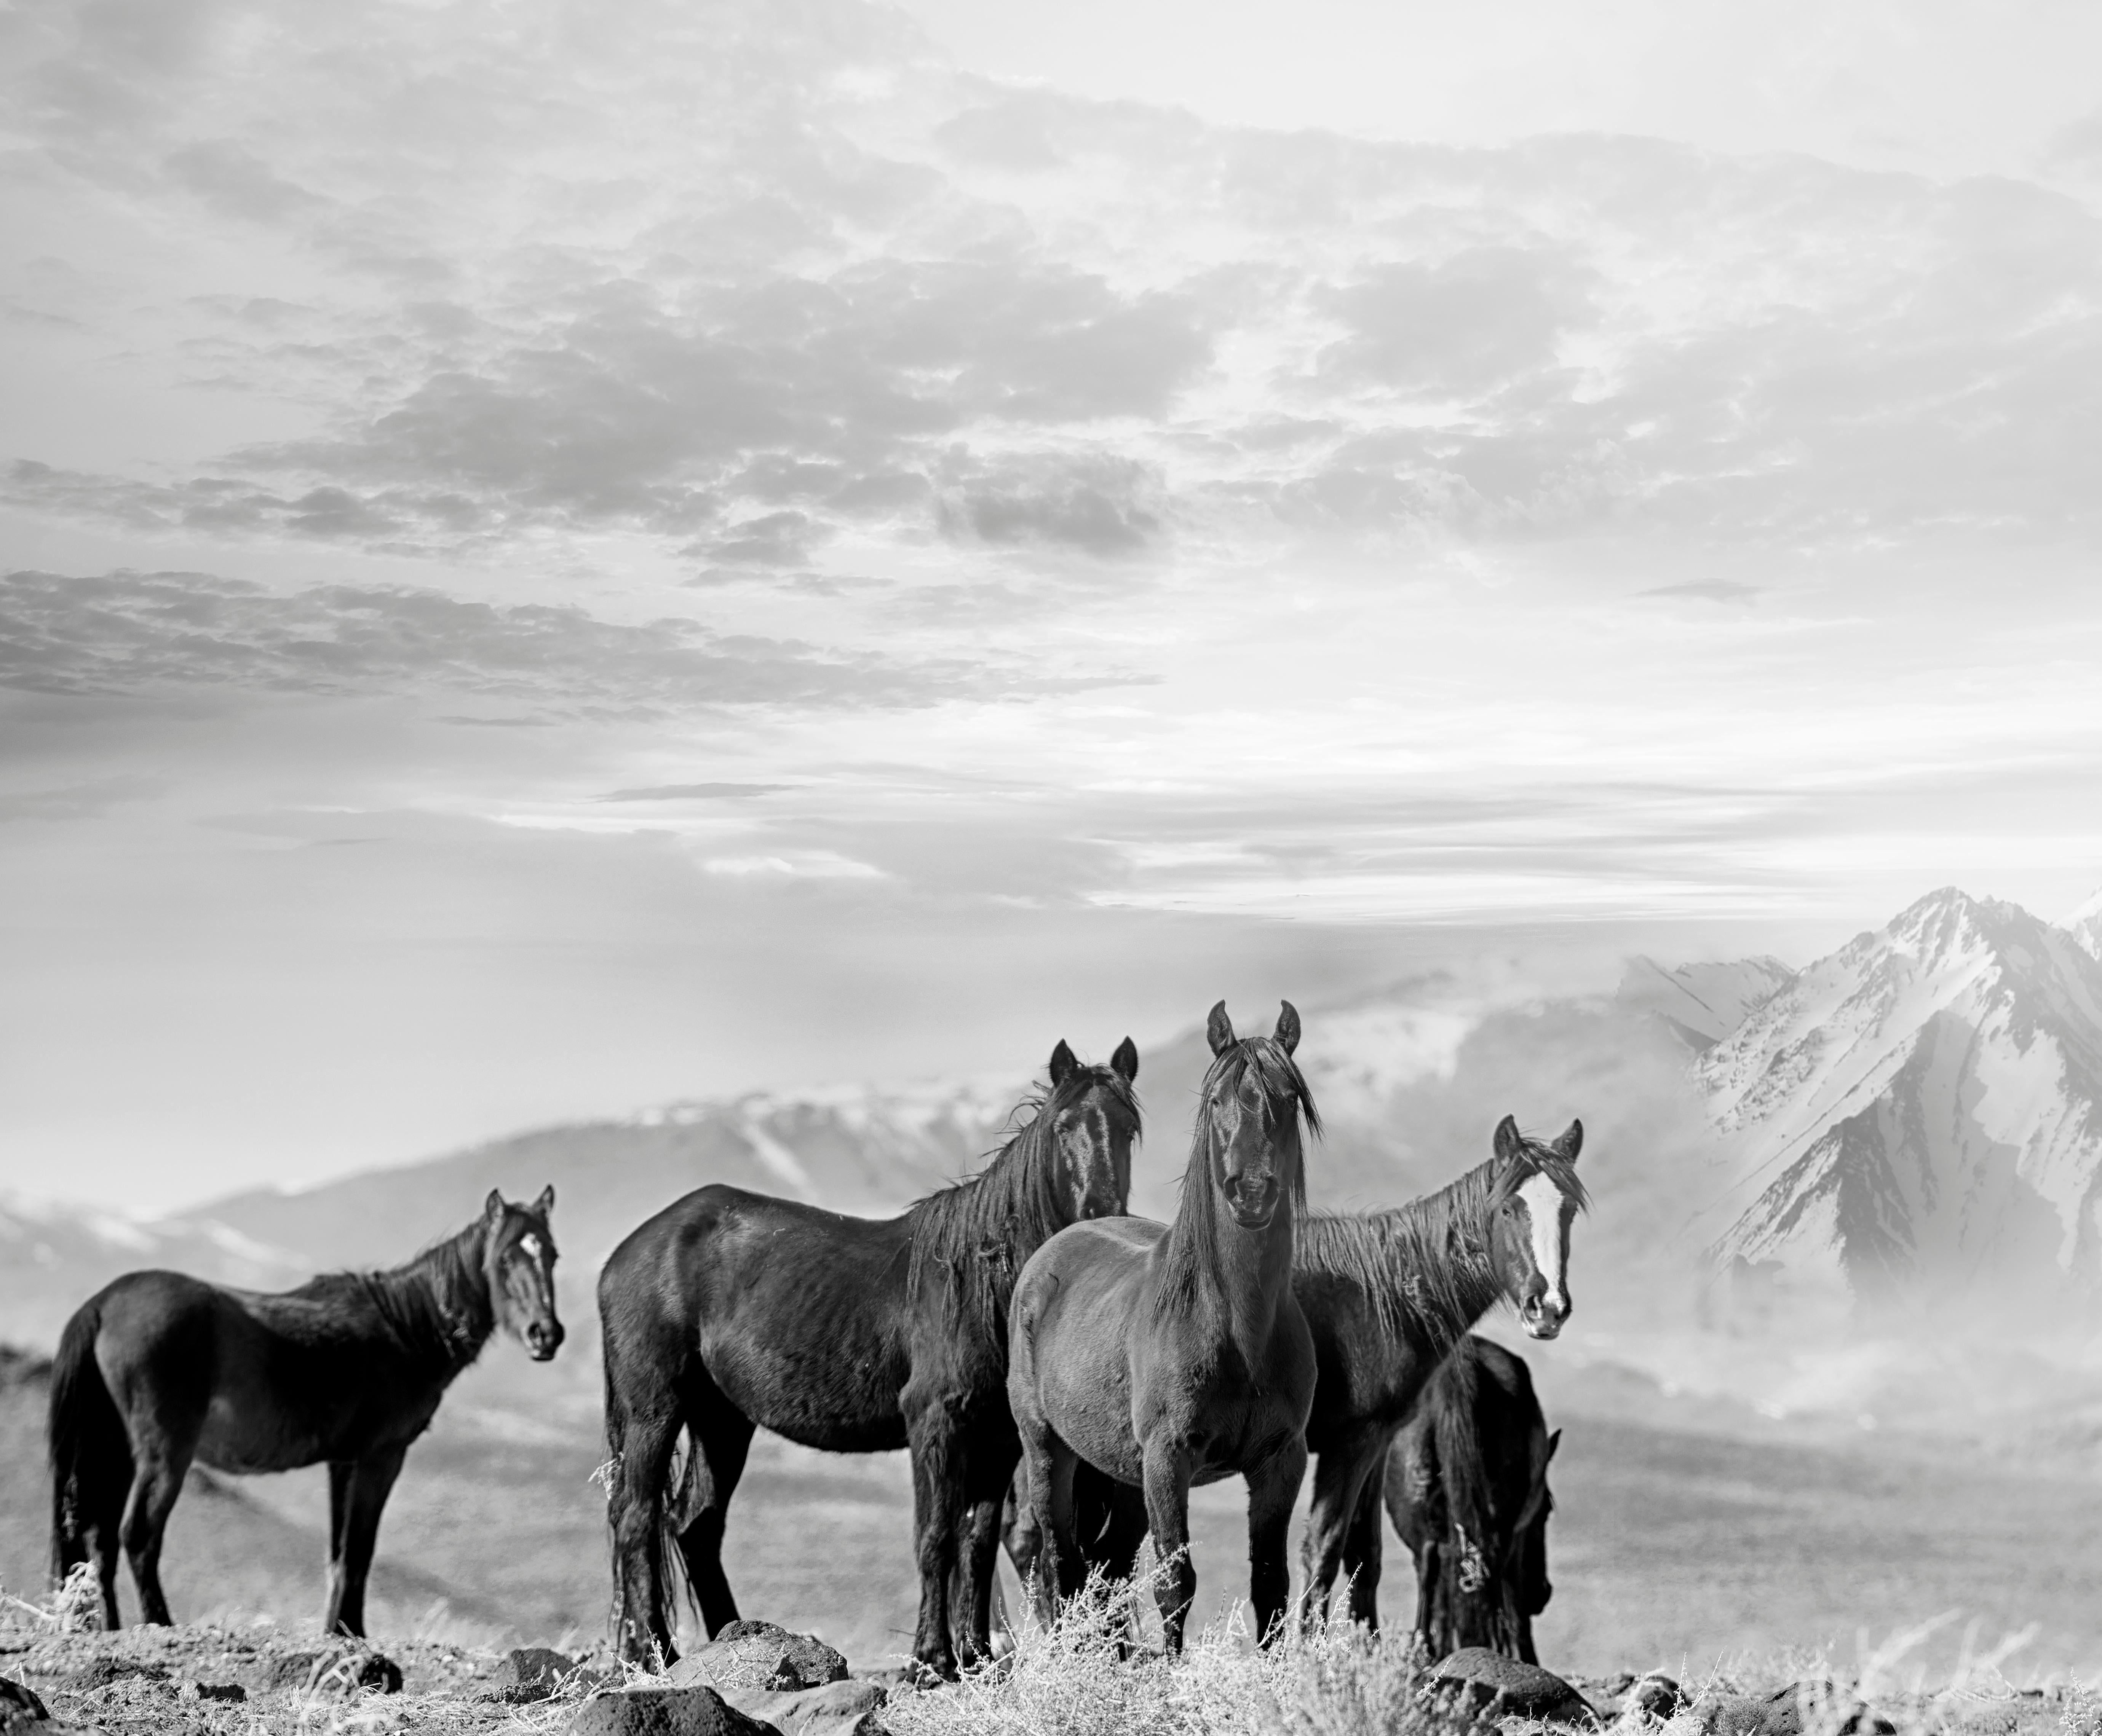 Shane Russeck Landscape Photograph - High Sierra Mustangs - 40x30 Black and White Photography of Wild Horses 